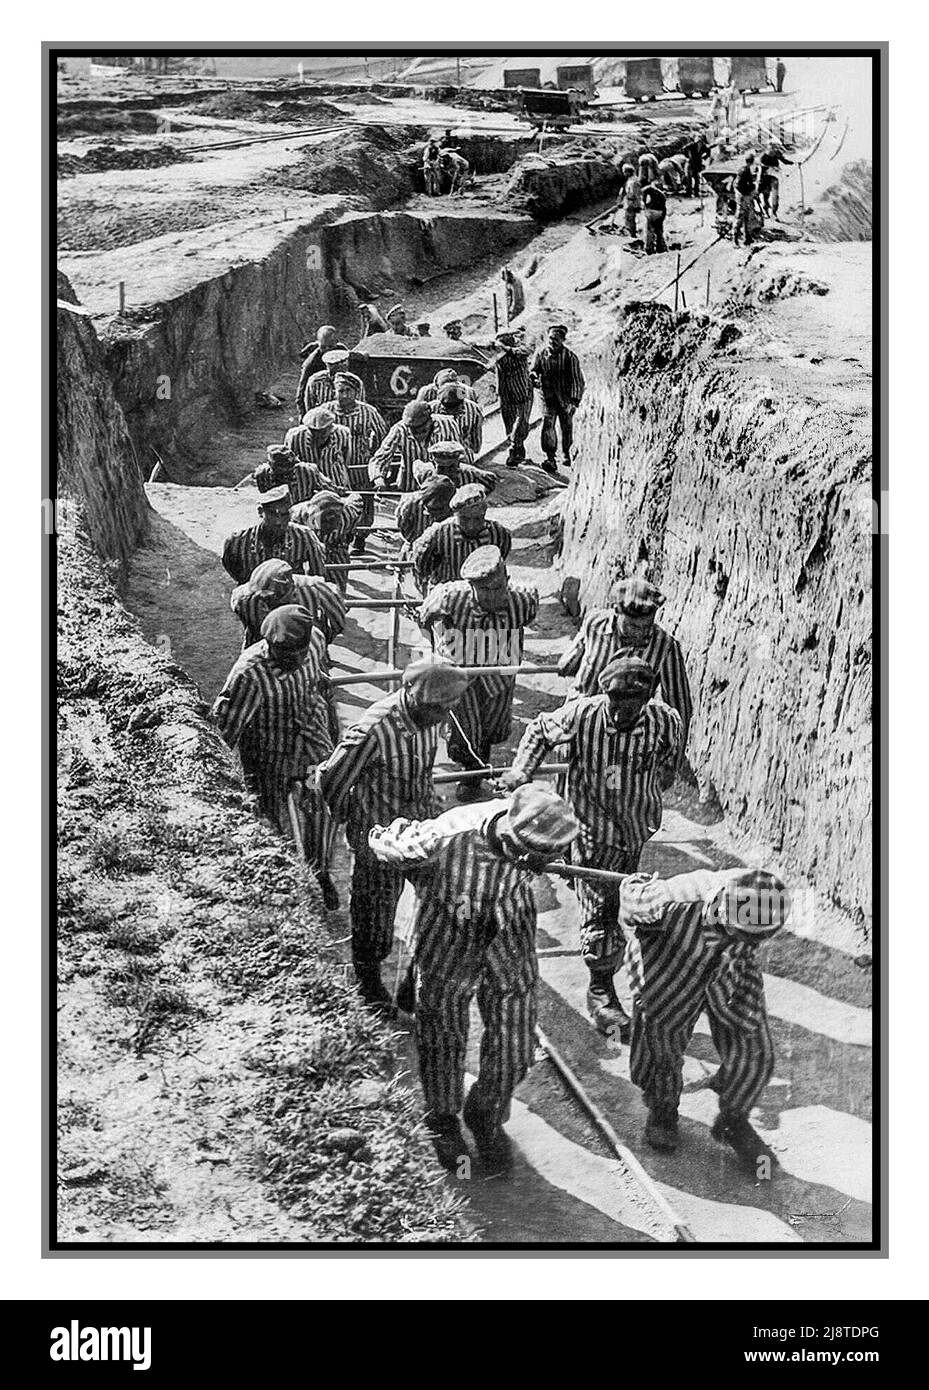 Nazi German death camp Mauthausen-Gusen (1938-1945) in Austria. Prisoners in the quarry (Stairs of Death). Prisoners were forced to carry earth and giant granite boulders in order to supply underground tunnels under Sankt Georgen an der Gusen town; such forced hard labour was like a torture. The American US Army liberated this death camp and shot commandant of the camp Franz Ziereis. Stock Photo